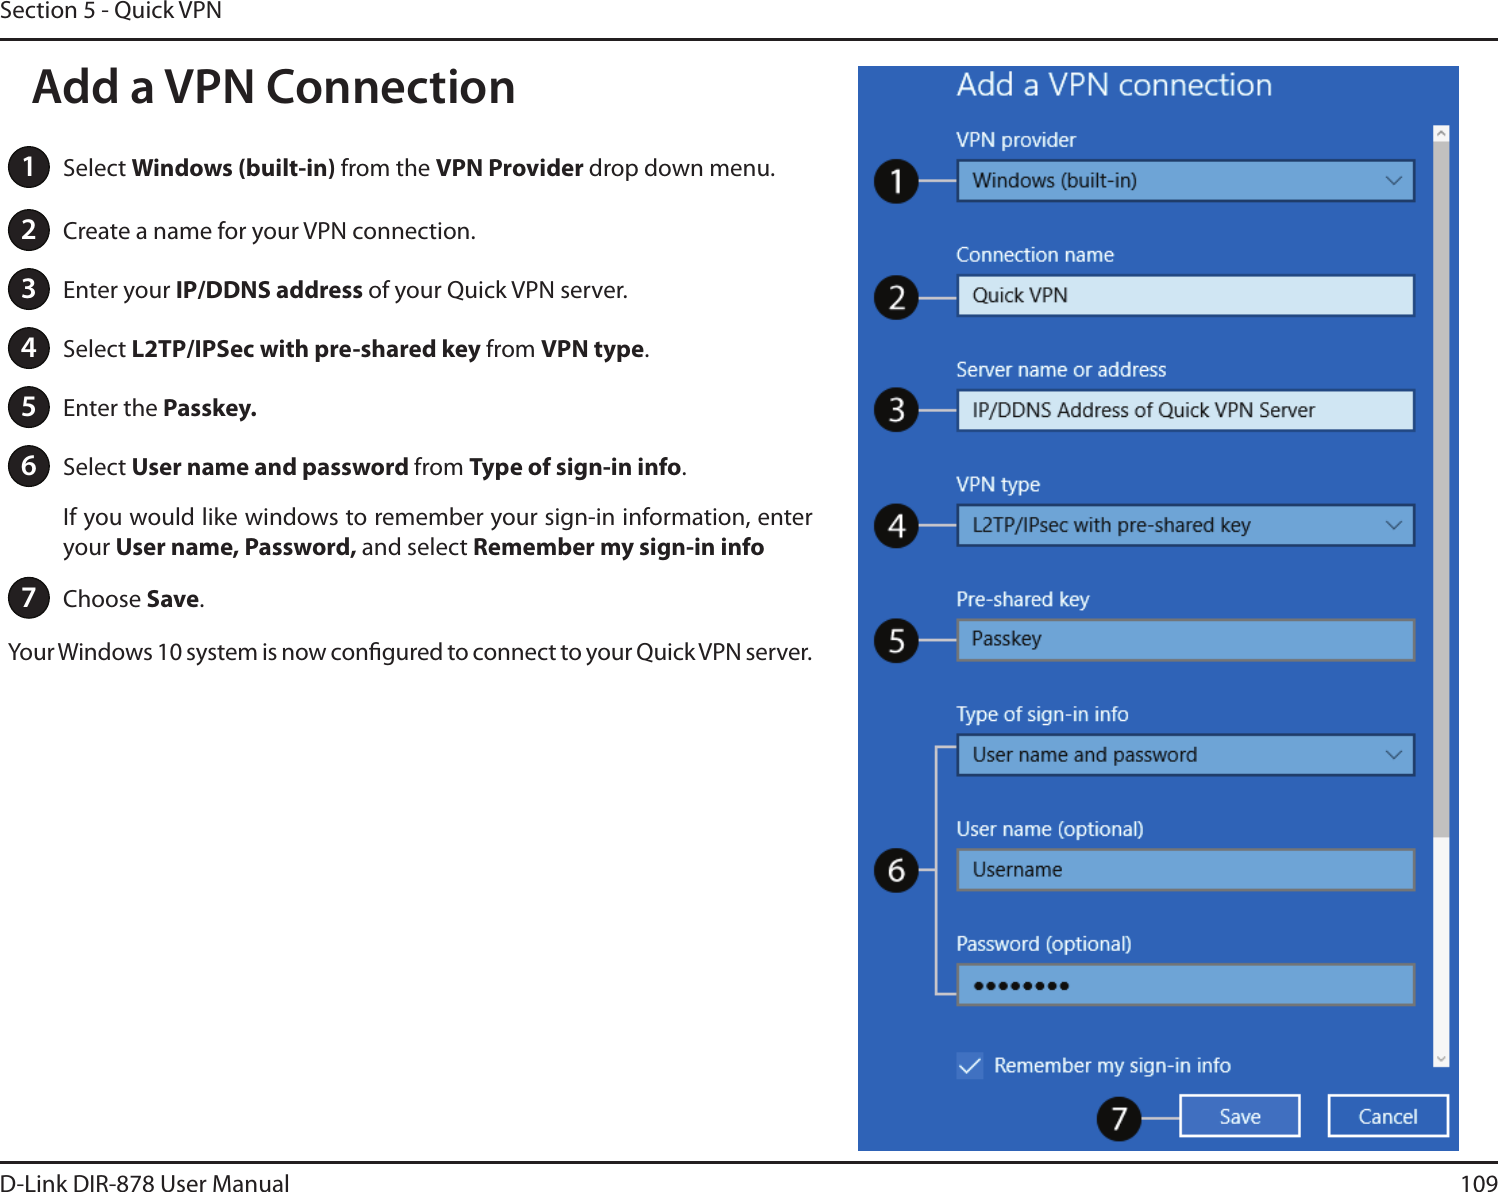 109D-Link DIR-878 User ManualSection 5 - Quick VPN1Select 8JOEPXTCVJMUJOfrom the VPN Provider drop down menu.2Create a name for your VPN connection.3Enter your *1%%/4BEESFTTof your Quick VPN server.4Select -51*14FD with pre-shared key from VPN type.5Enter the Passkey.6Select User name and password from Type of sign-in info.If you would like windows to remember your sign-in information, enter your 6TFSOBNF1BTTXPSEand select Remember my sign-in info7Choose Save.Your Windows 10 system is now congured to connect to your Quick VPN server.Add a VPN Connection